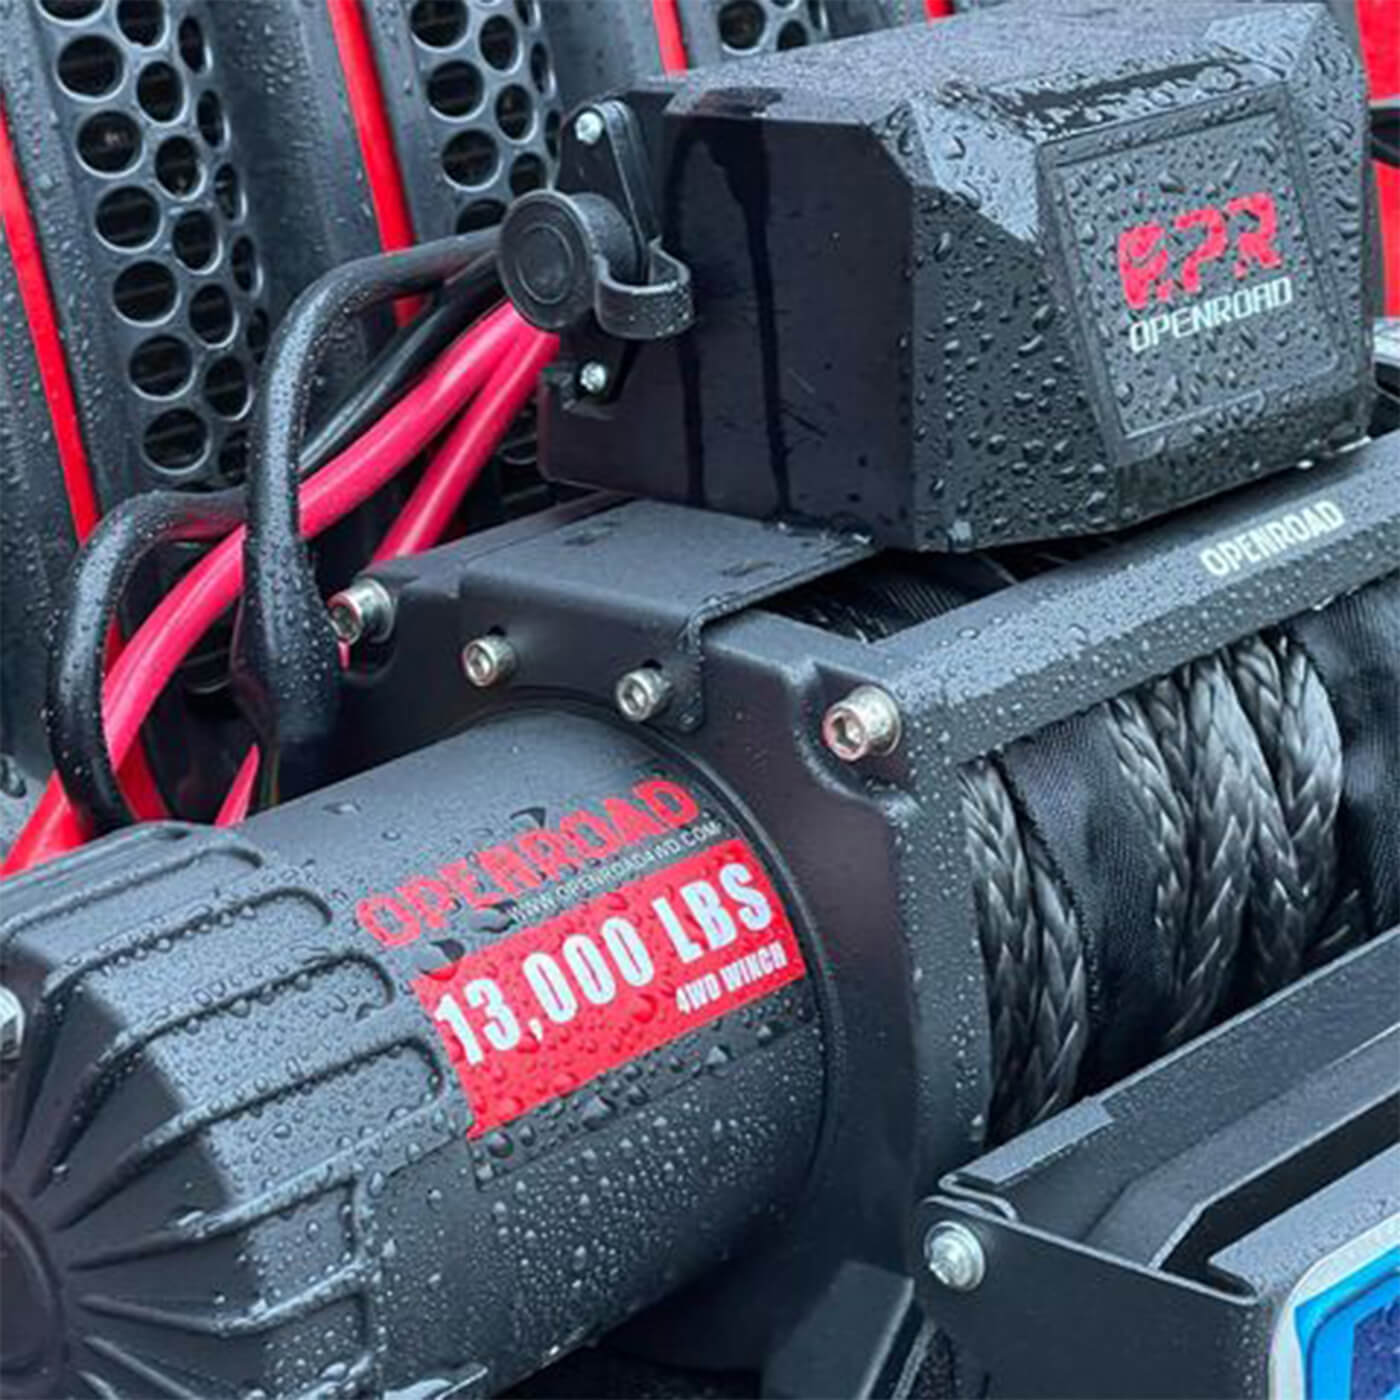 OPENROAD 13,000 lbs winch with synthetic rope and 2 wireless remote controllers - Panther Series 2S, compatible with the front bumper designed for a 12,000 lbs winch winch OPENROAD   